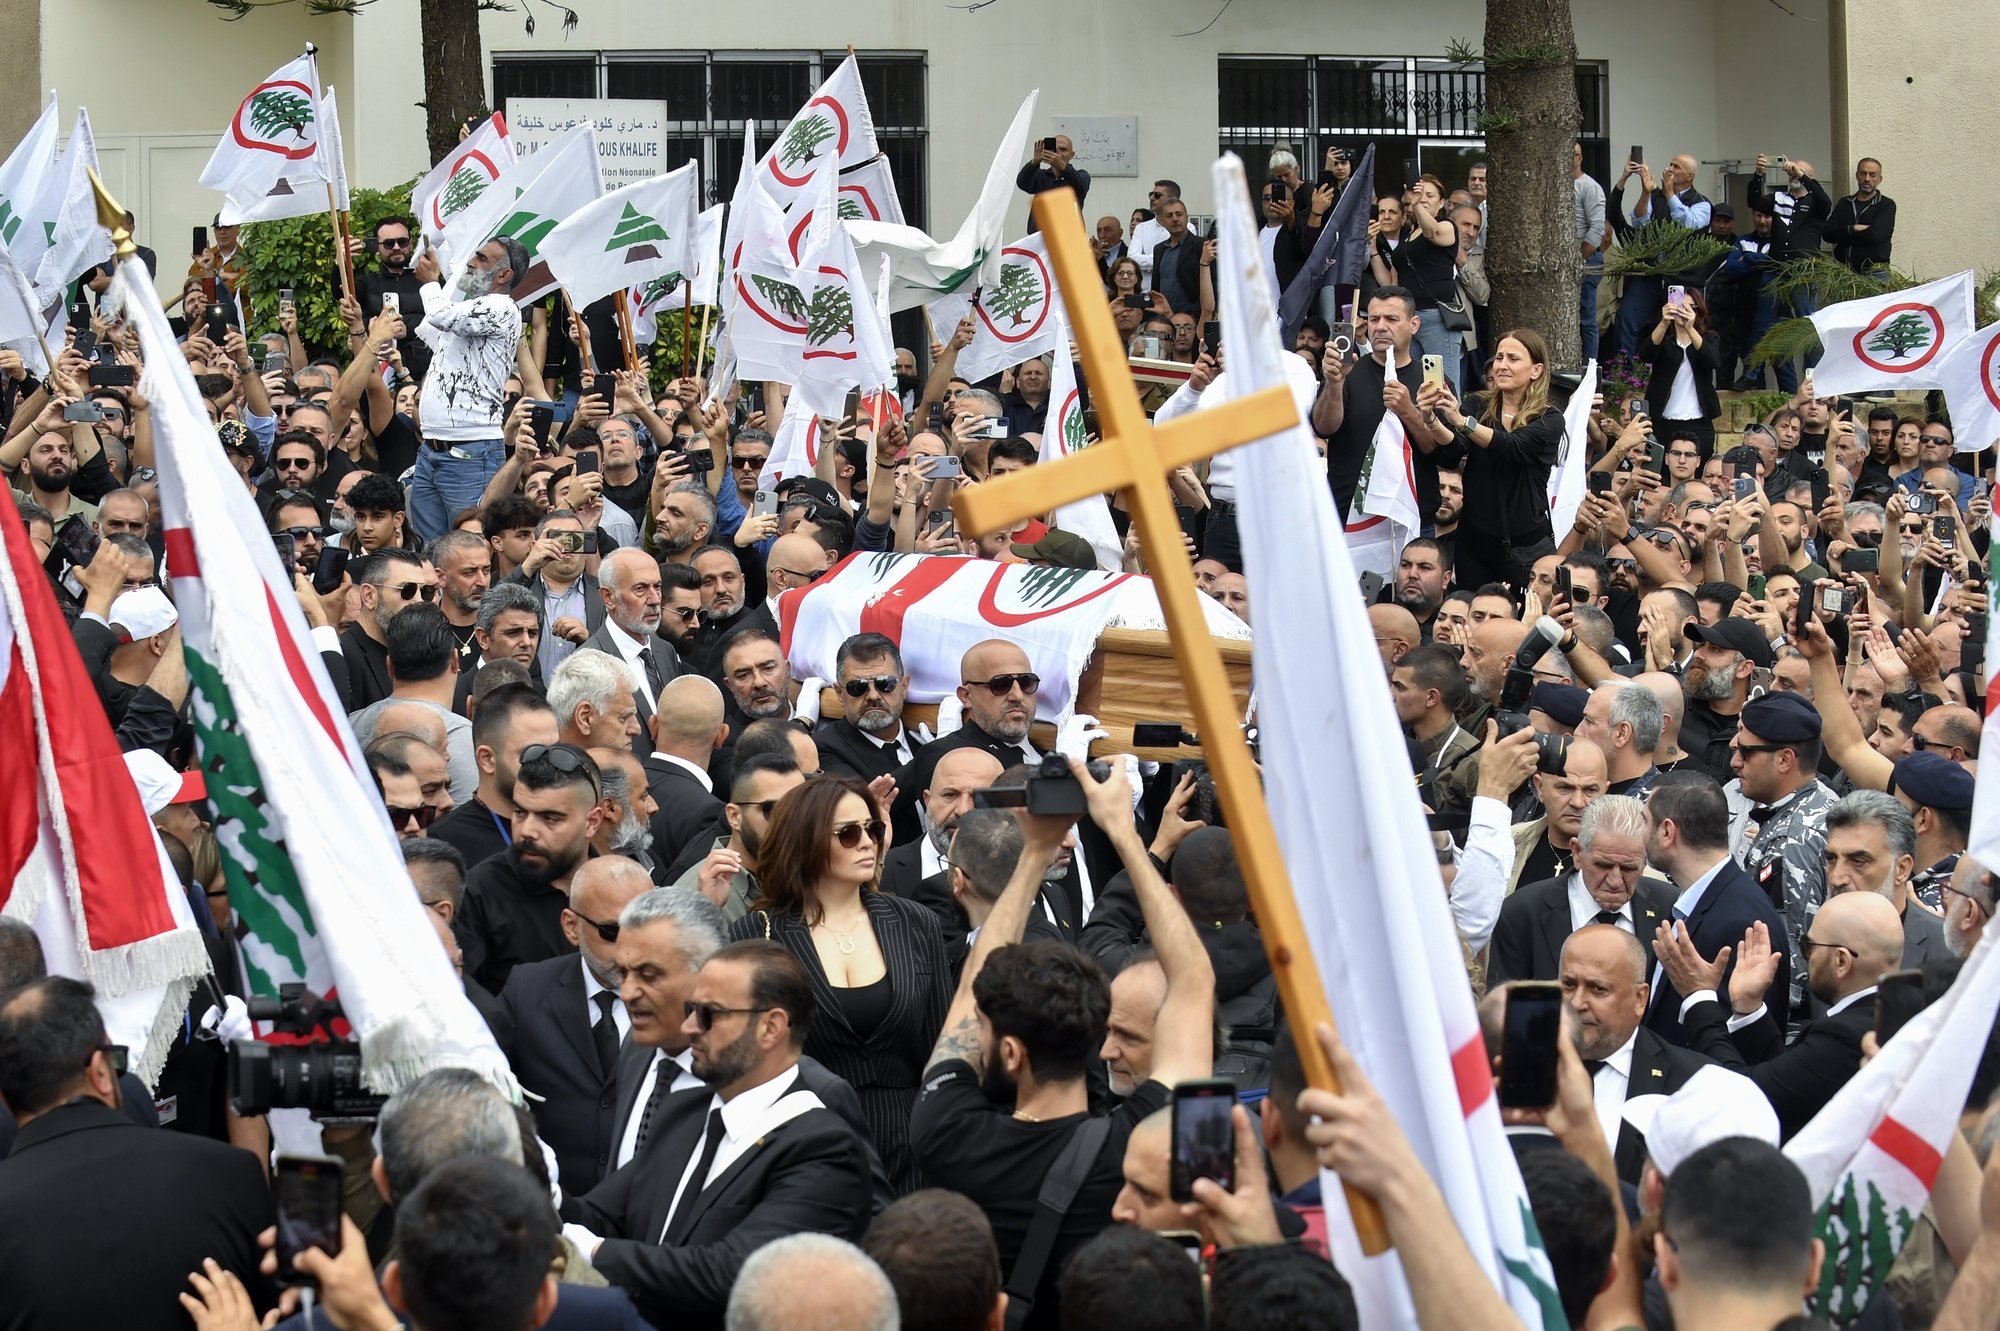 epa11274805 Mourners carry the coffin of Pascal Suleiman, an official of the Lebanese Forces Christian party, during his funeral in Byblos (Jbeil), Lebanon, 12 April 2024. According to the Lebanese army, Pascal Suleiman, a coordinator for the Christian Lebanese Forces party in the Jbeil area that opposes the Syrian government and its Lebanese ally Hezbollah, was killed by Syrian kidnappers when the gang tried to steal his car on 08 April.  EPA/WAEL HAMZEH